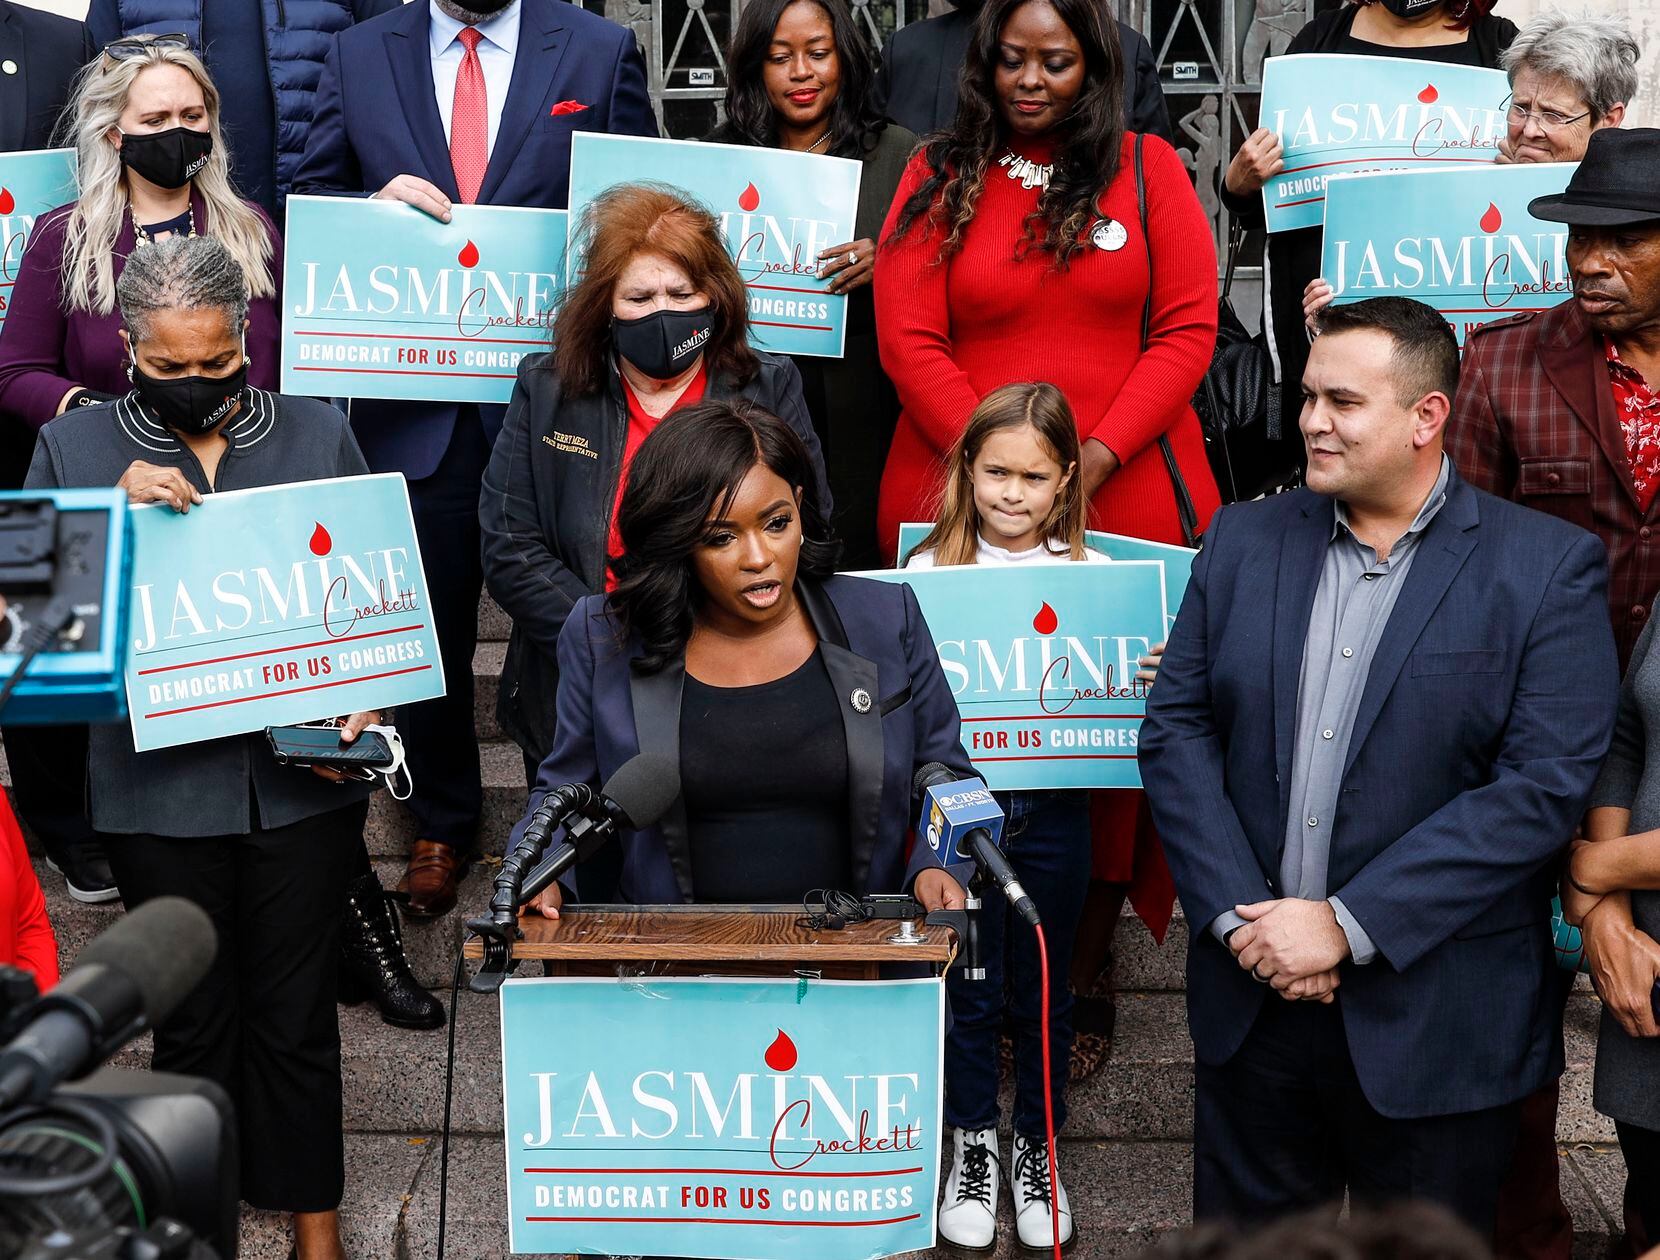 State Rep. Jasmine Crockett talked about her platform while running for Congressional...